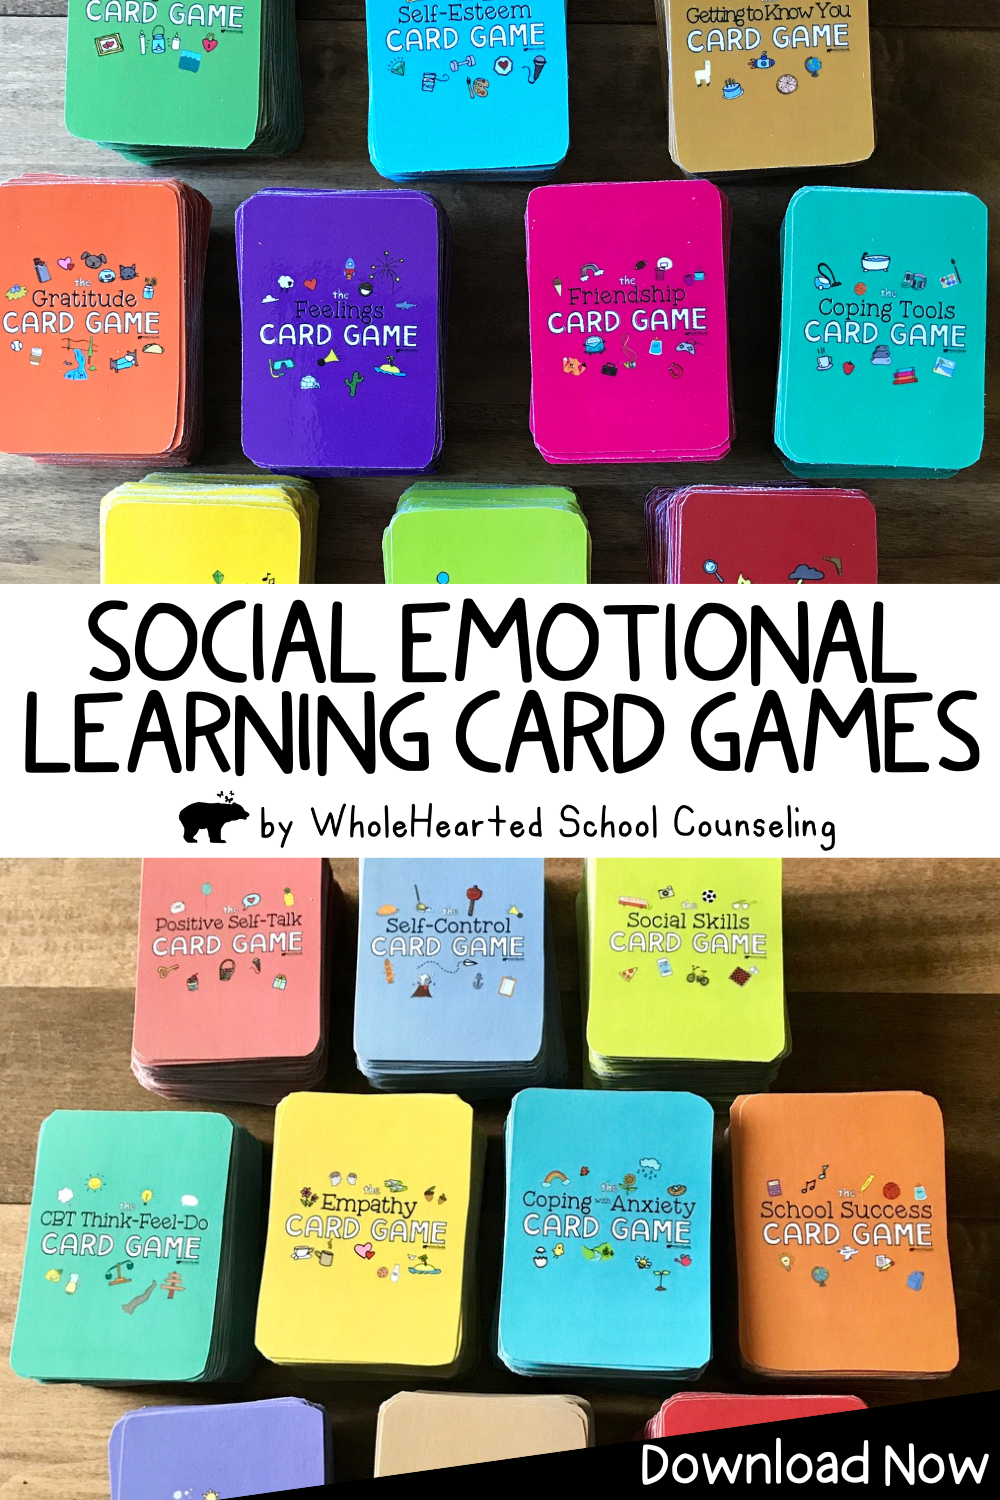 Collection of different card games like self-esteem, coping skills, growth mindset, and social skills.